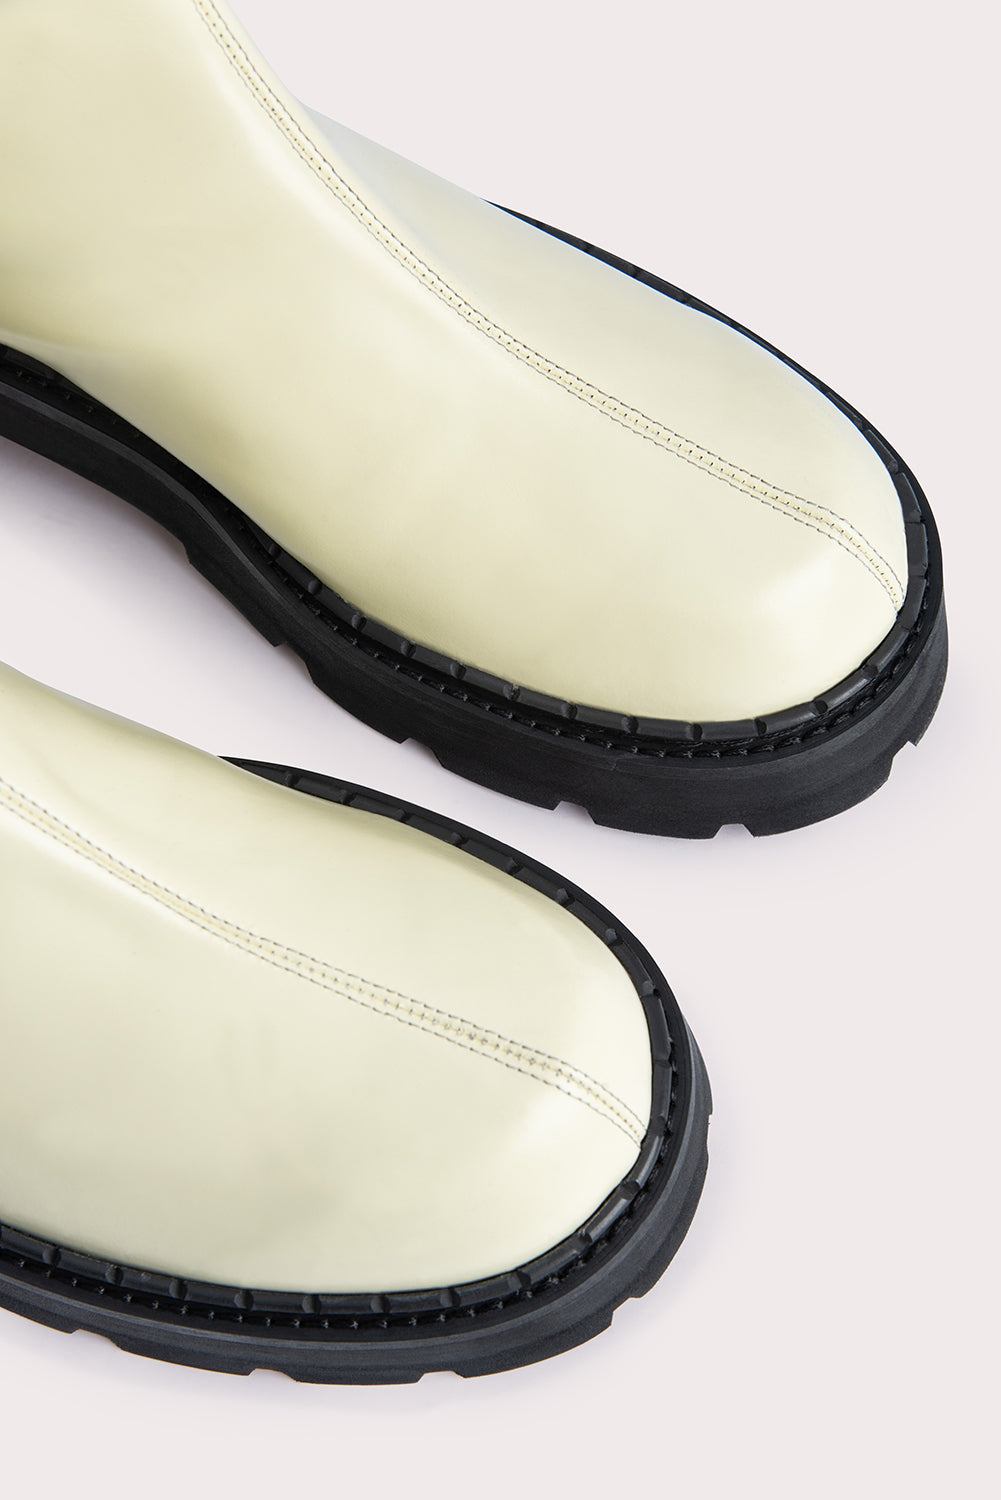 Alister Ivory Soft Semi Patent Leather